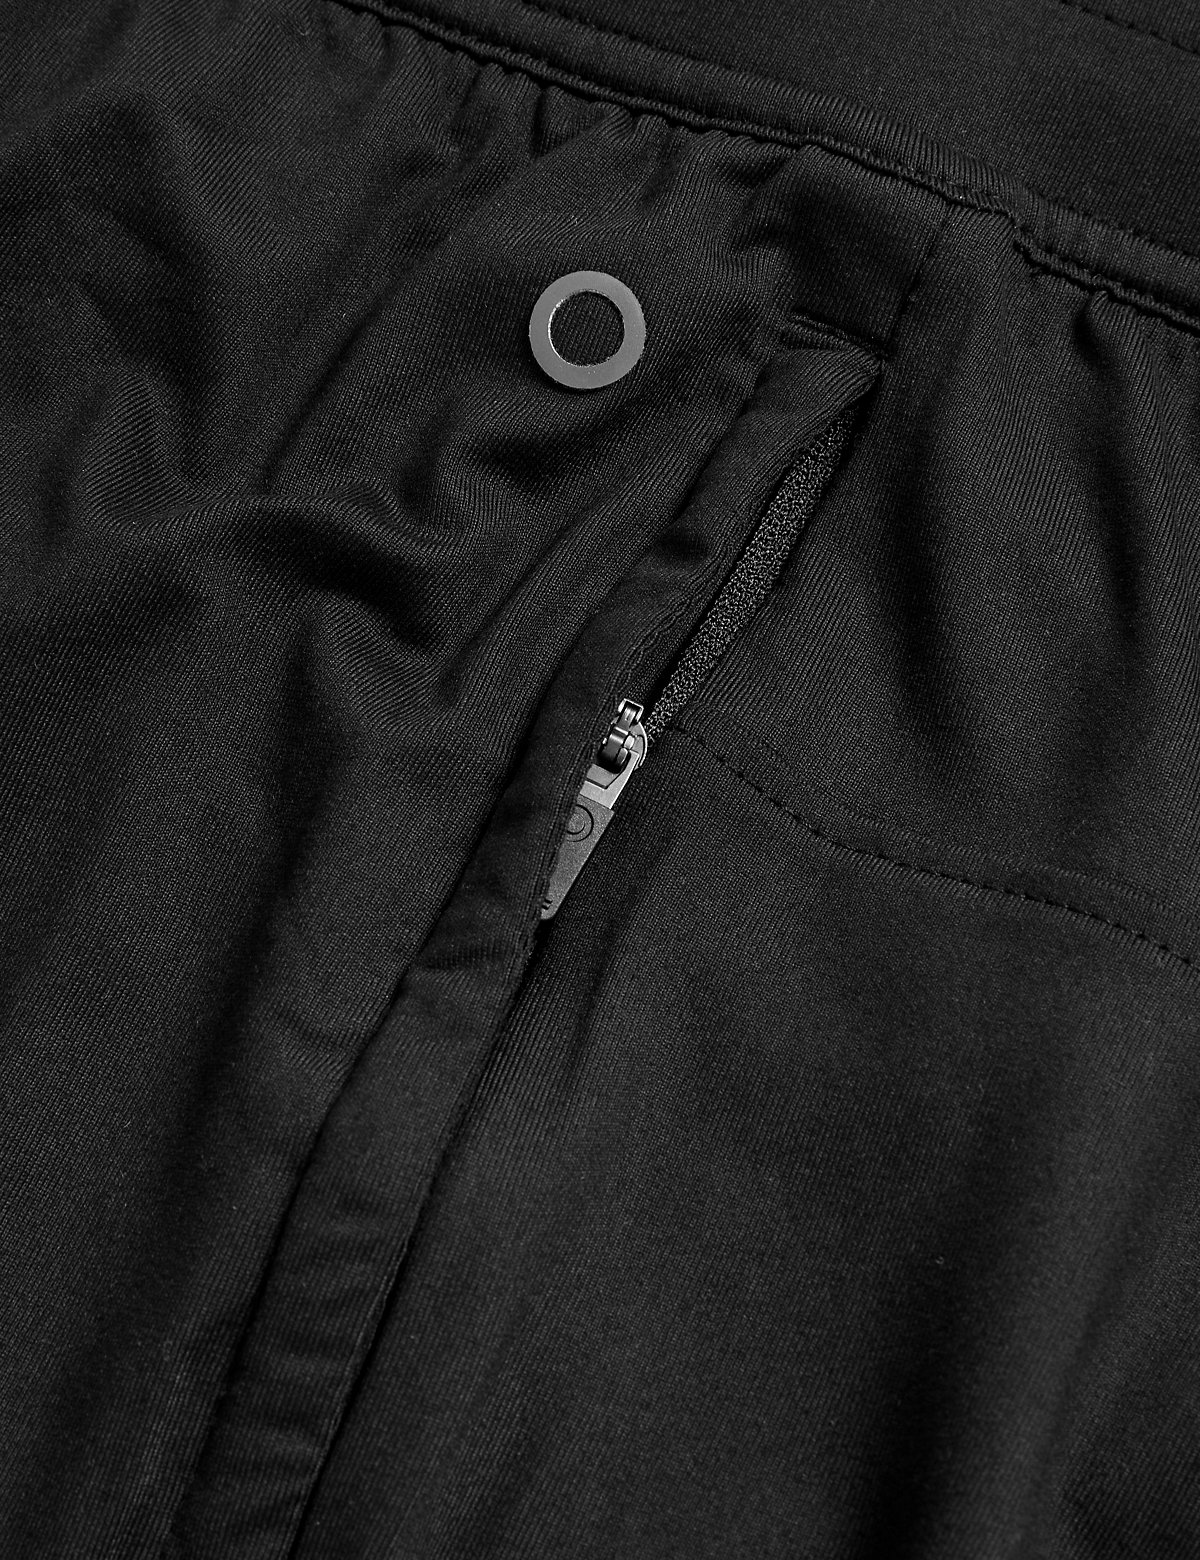 Quick Dry Sports Joggers